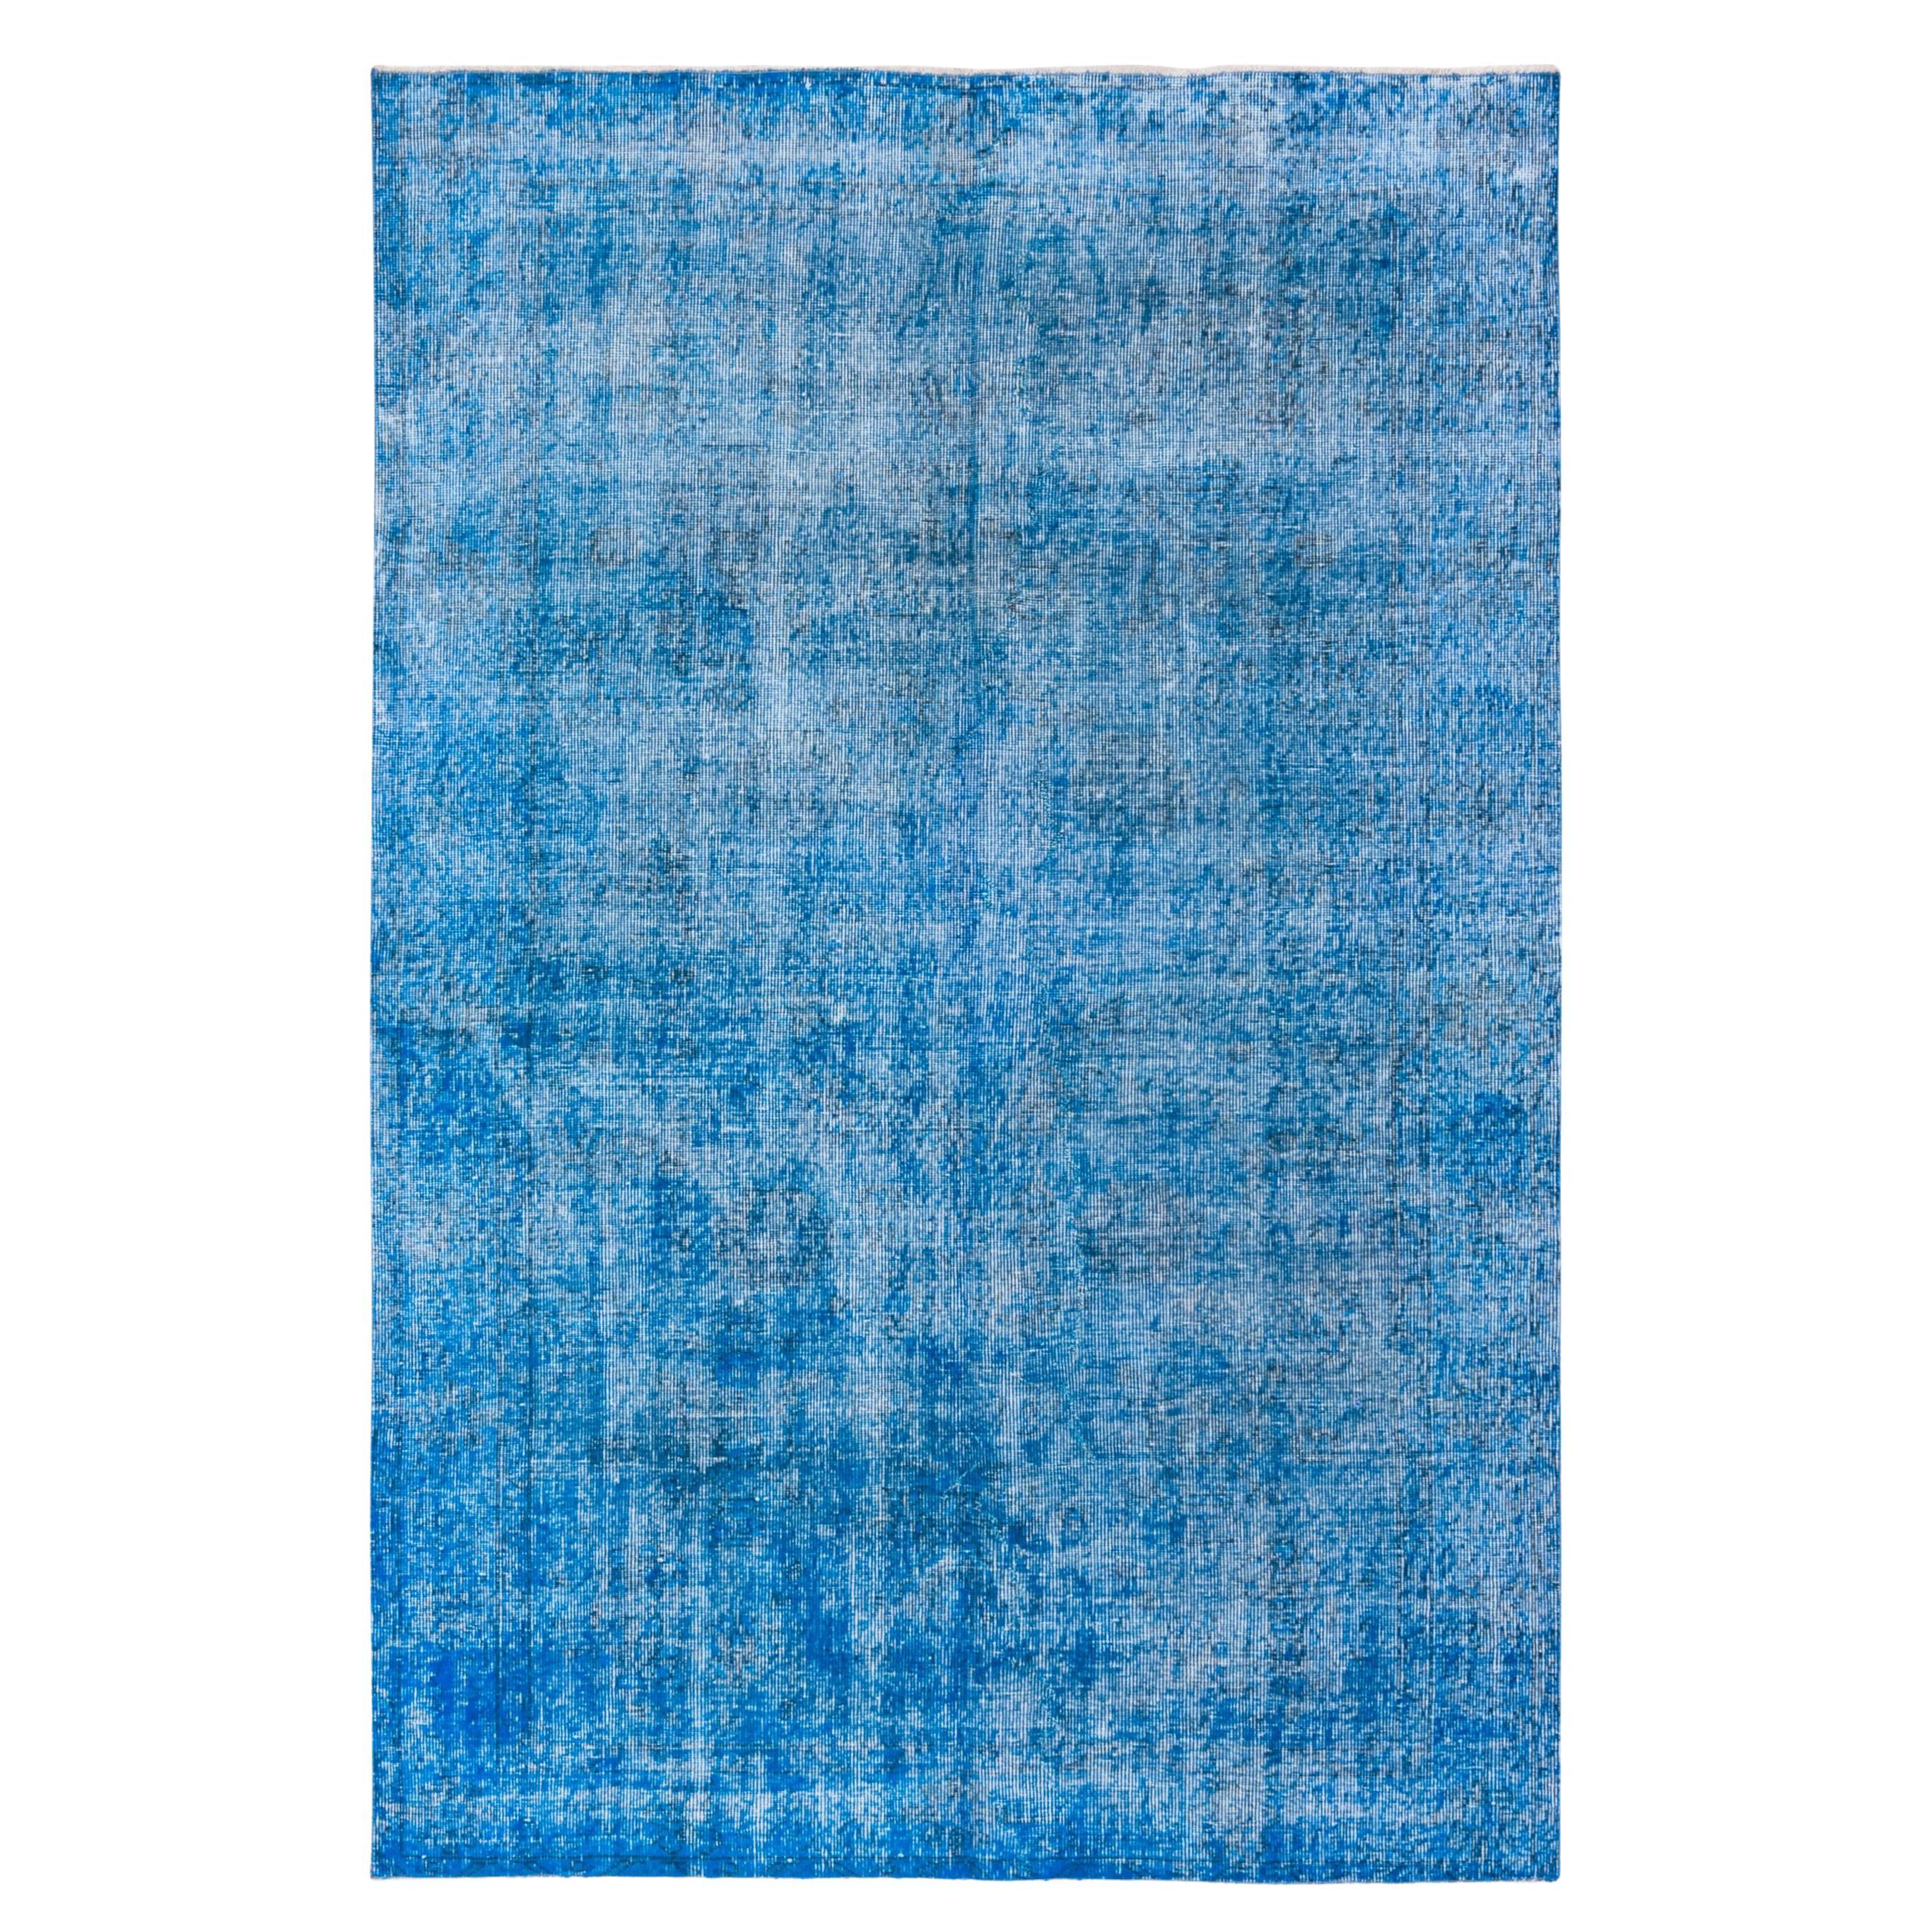 Vintage Overdyed Blue Rug, Shabby Chic, Bright Colored For Sale